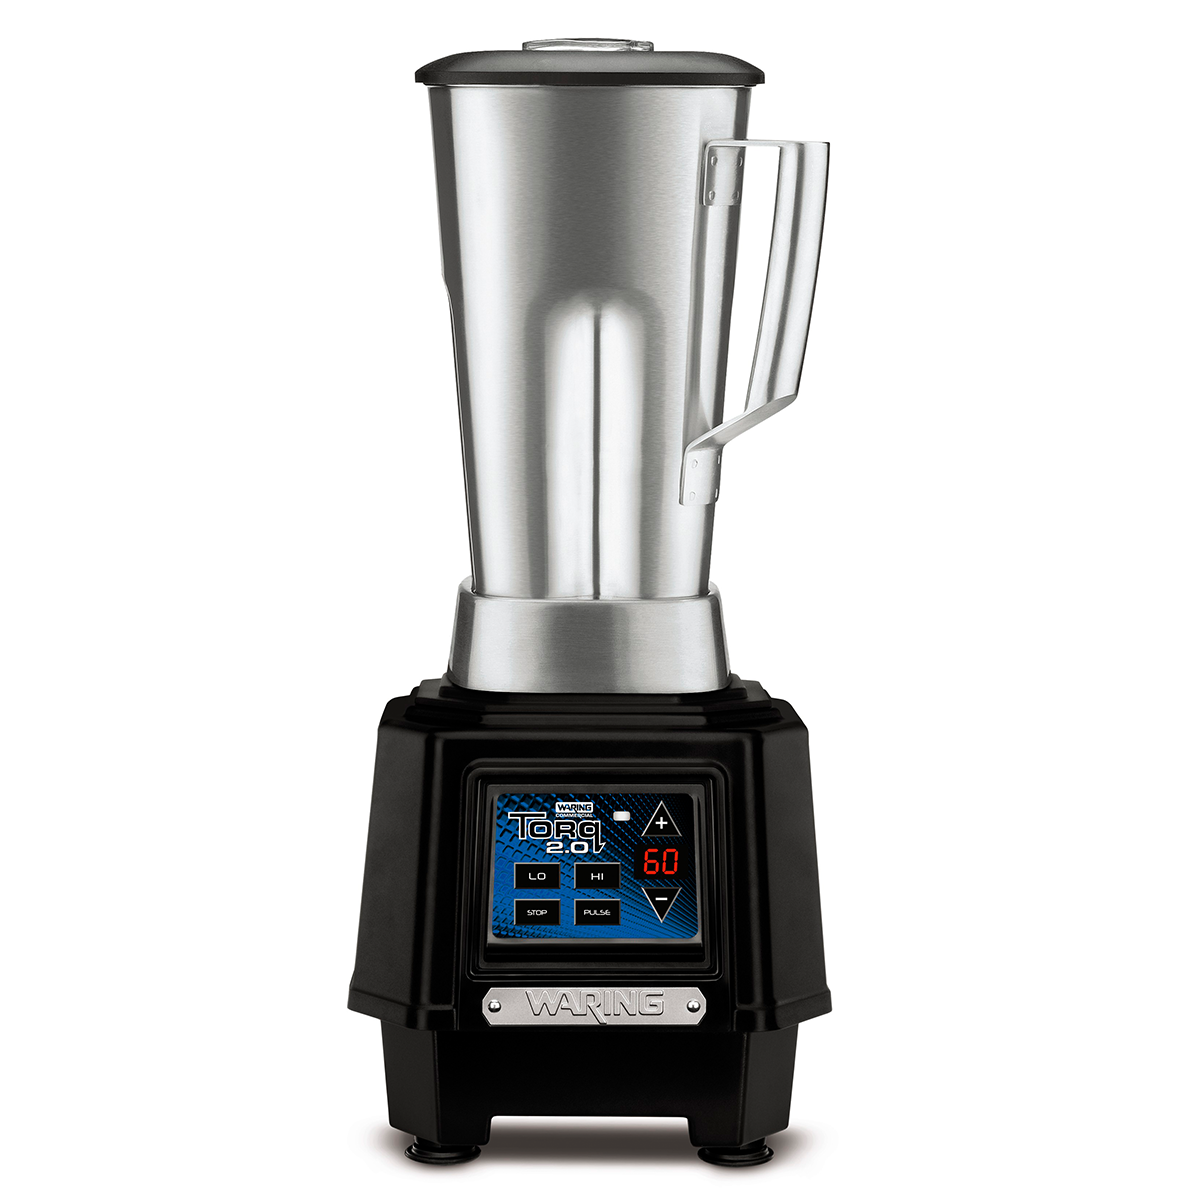 https://www.waringlab.com/assets/images/database/products/tbb160s6-waring-lab-blender-with-stainless-stell-container-main.png